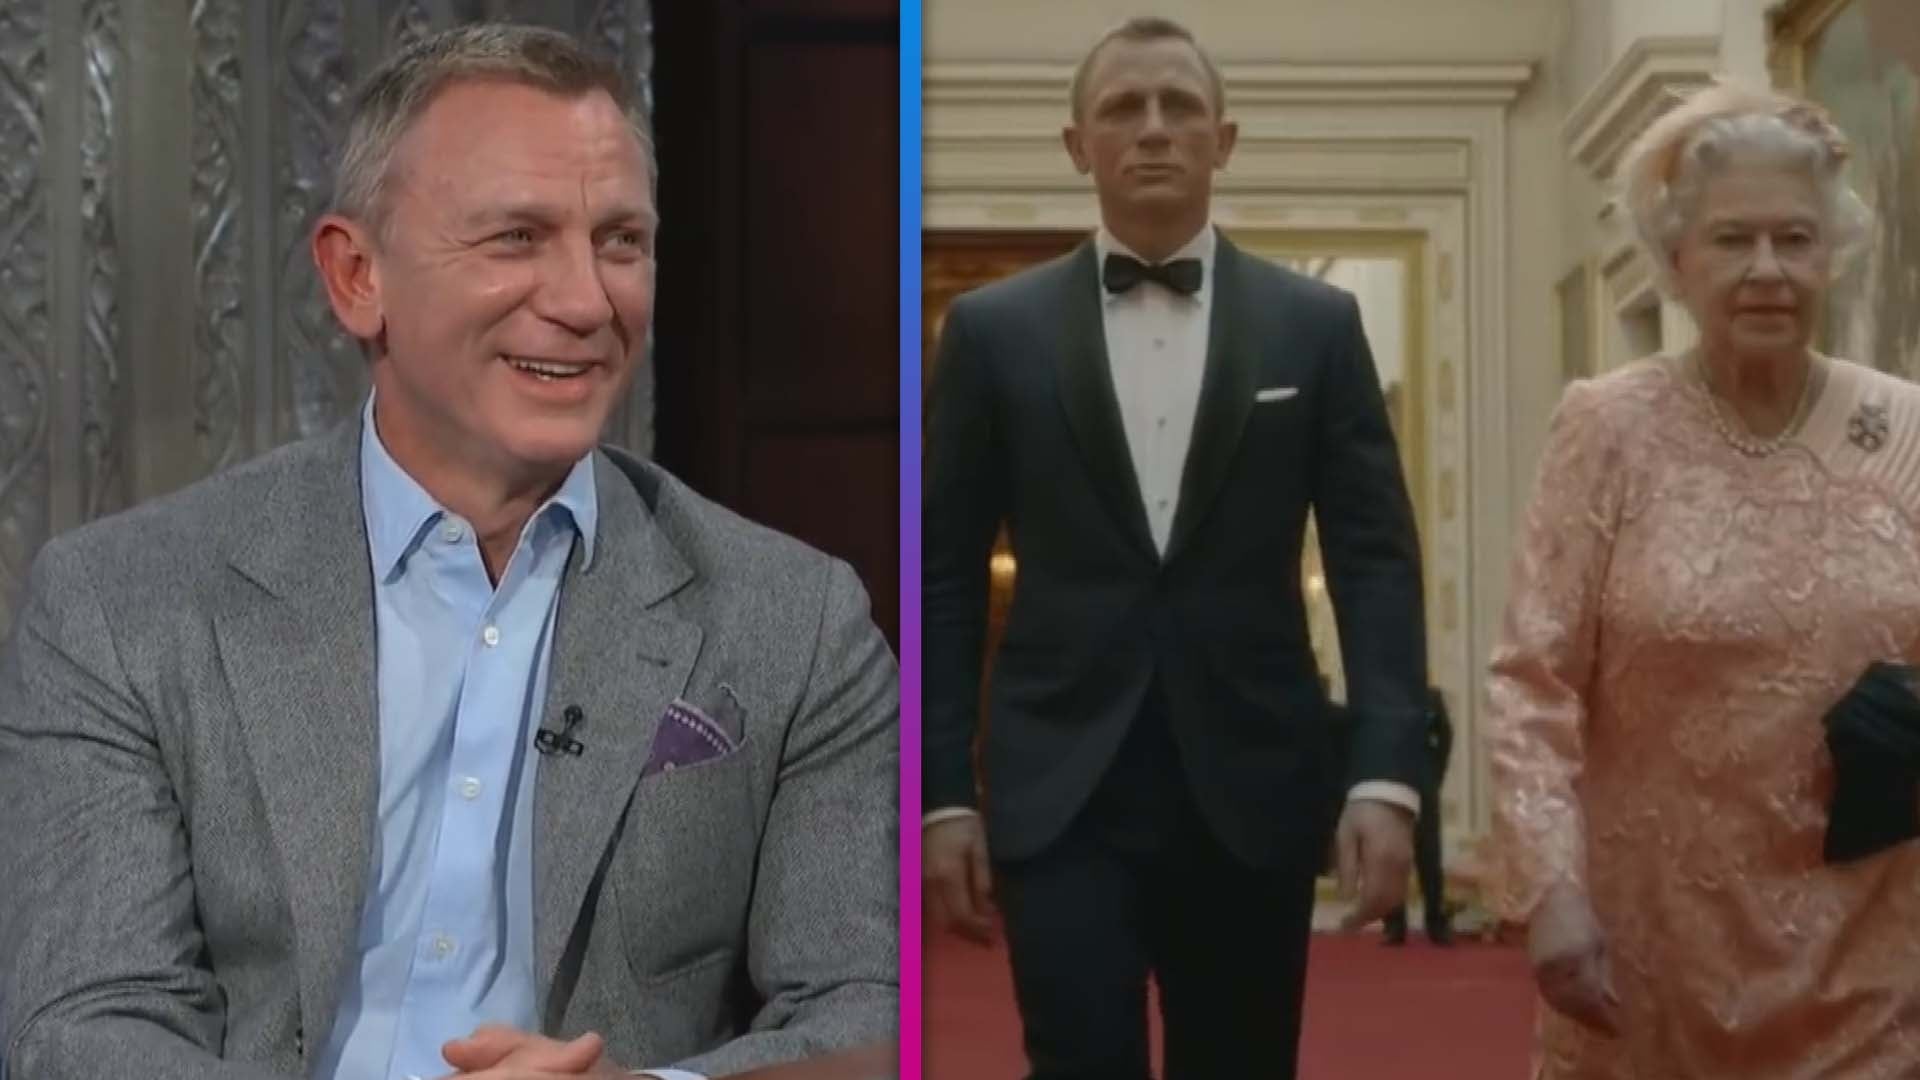 Daniel Craig surprises fans with stunning dance moves in Taika Waititi ad